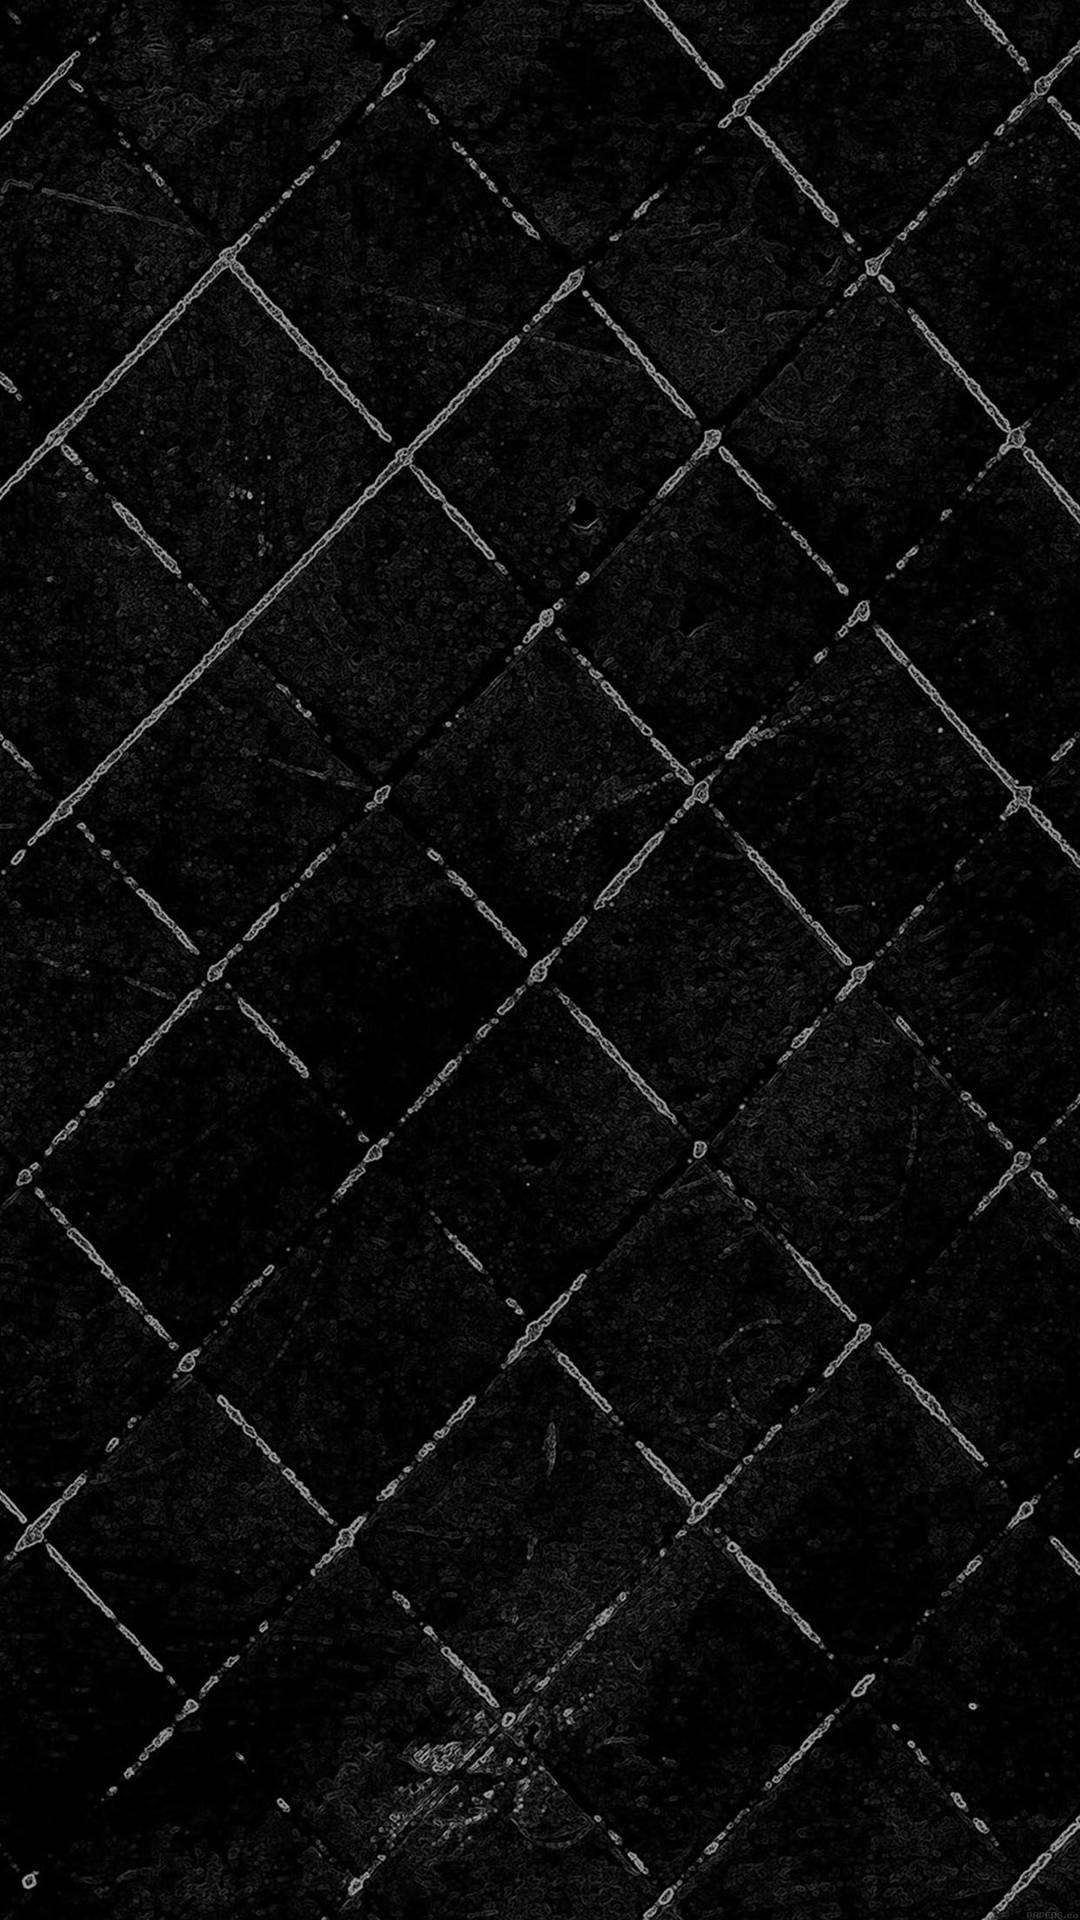 Black and white grunge wallpaper with a pattern of intersecting lines - Grunge